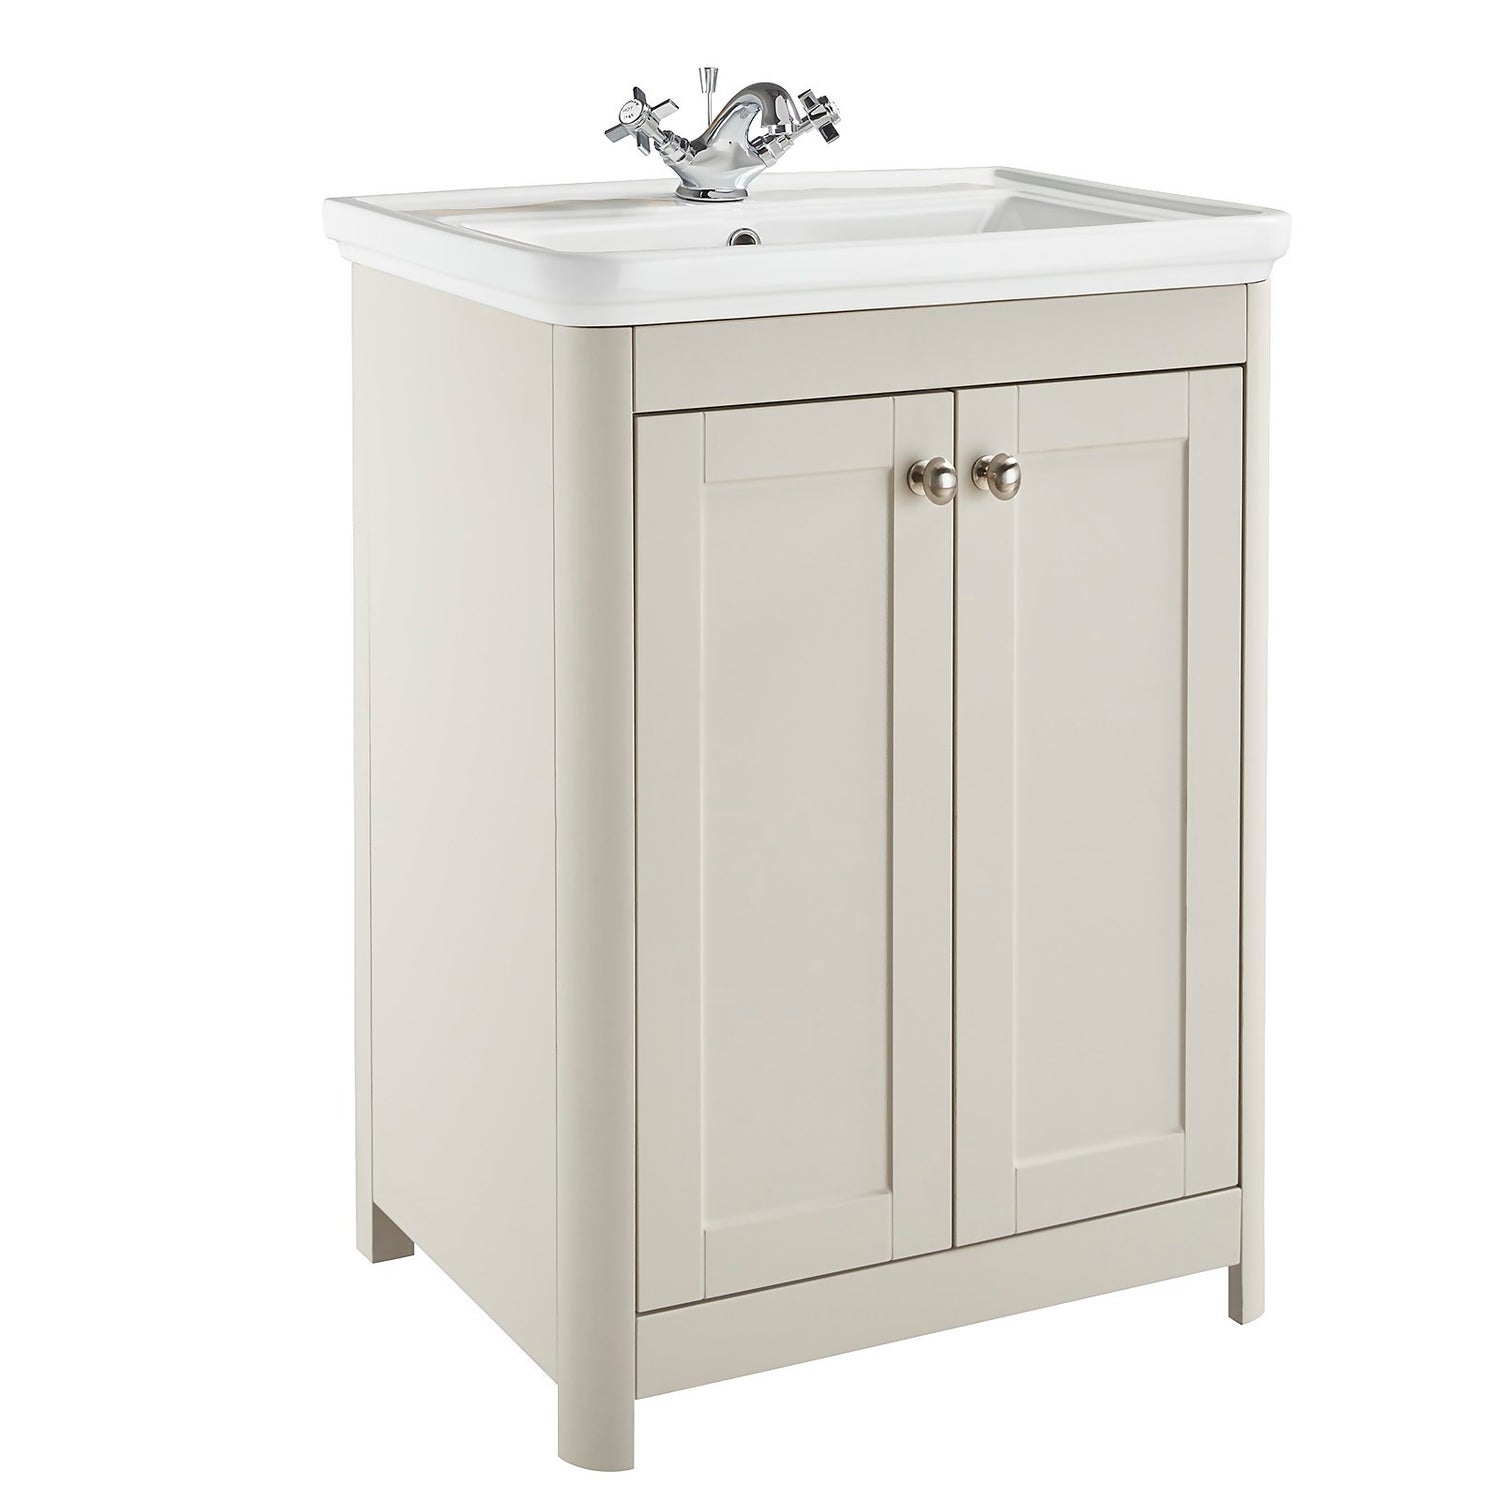 Country Living Wicklow 600 Basin Unit - Taupe Grey